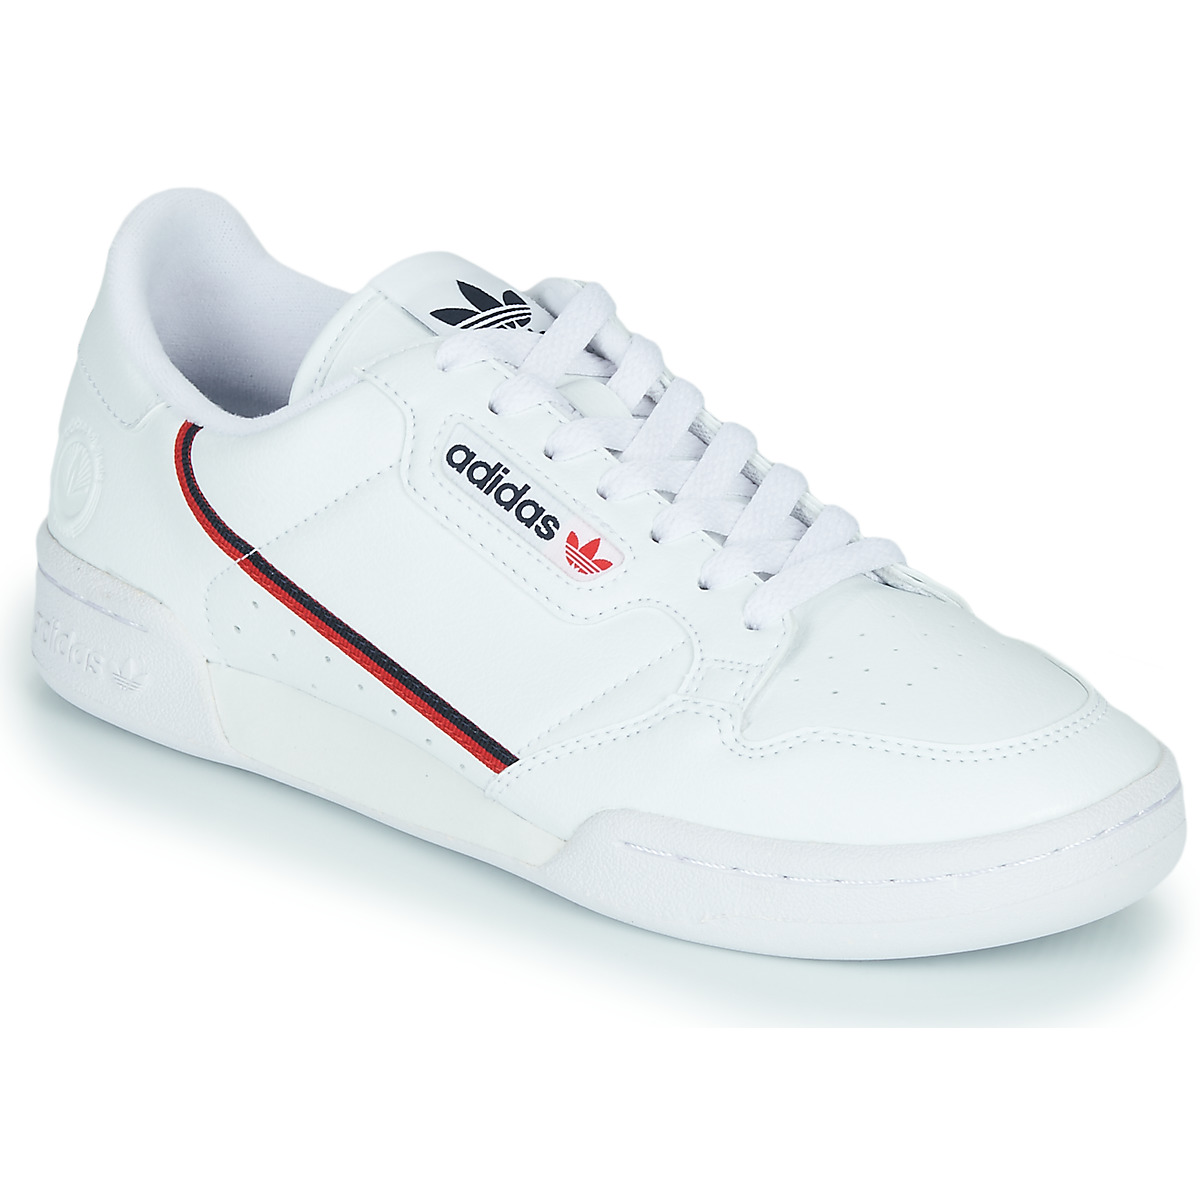 Institute Boil Be discouraged adidas Originals CONTINENTAL 80 VEGA White - Fast delivery | Spartoo Europe  ! - Shoes Low top trainers 121,00 €